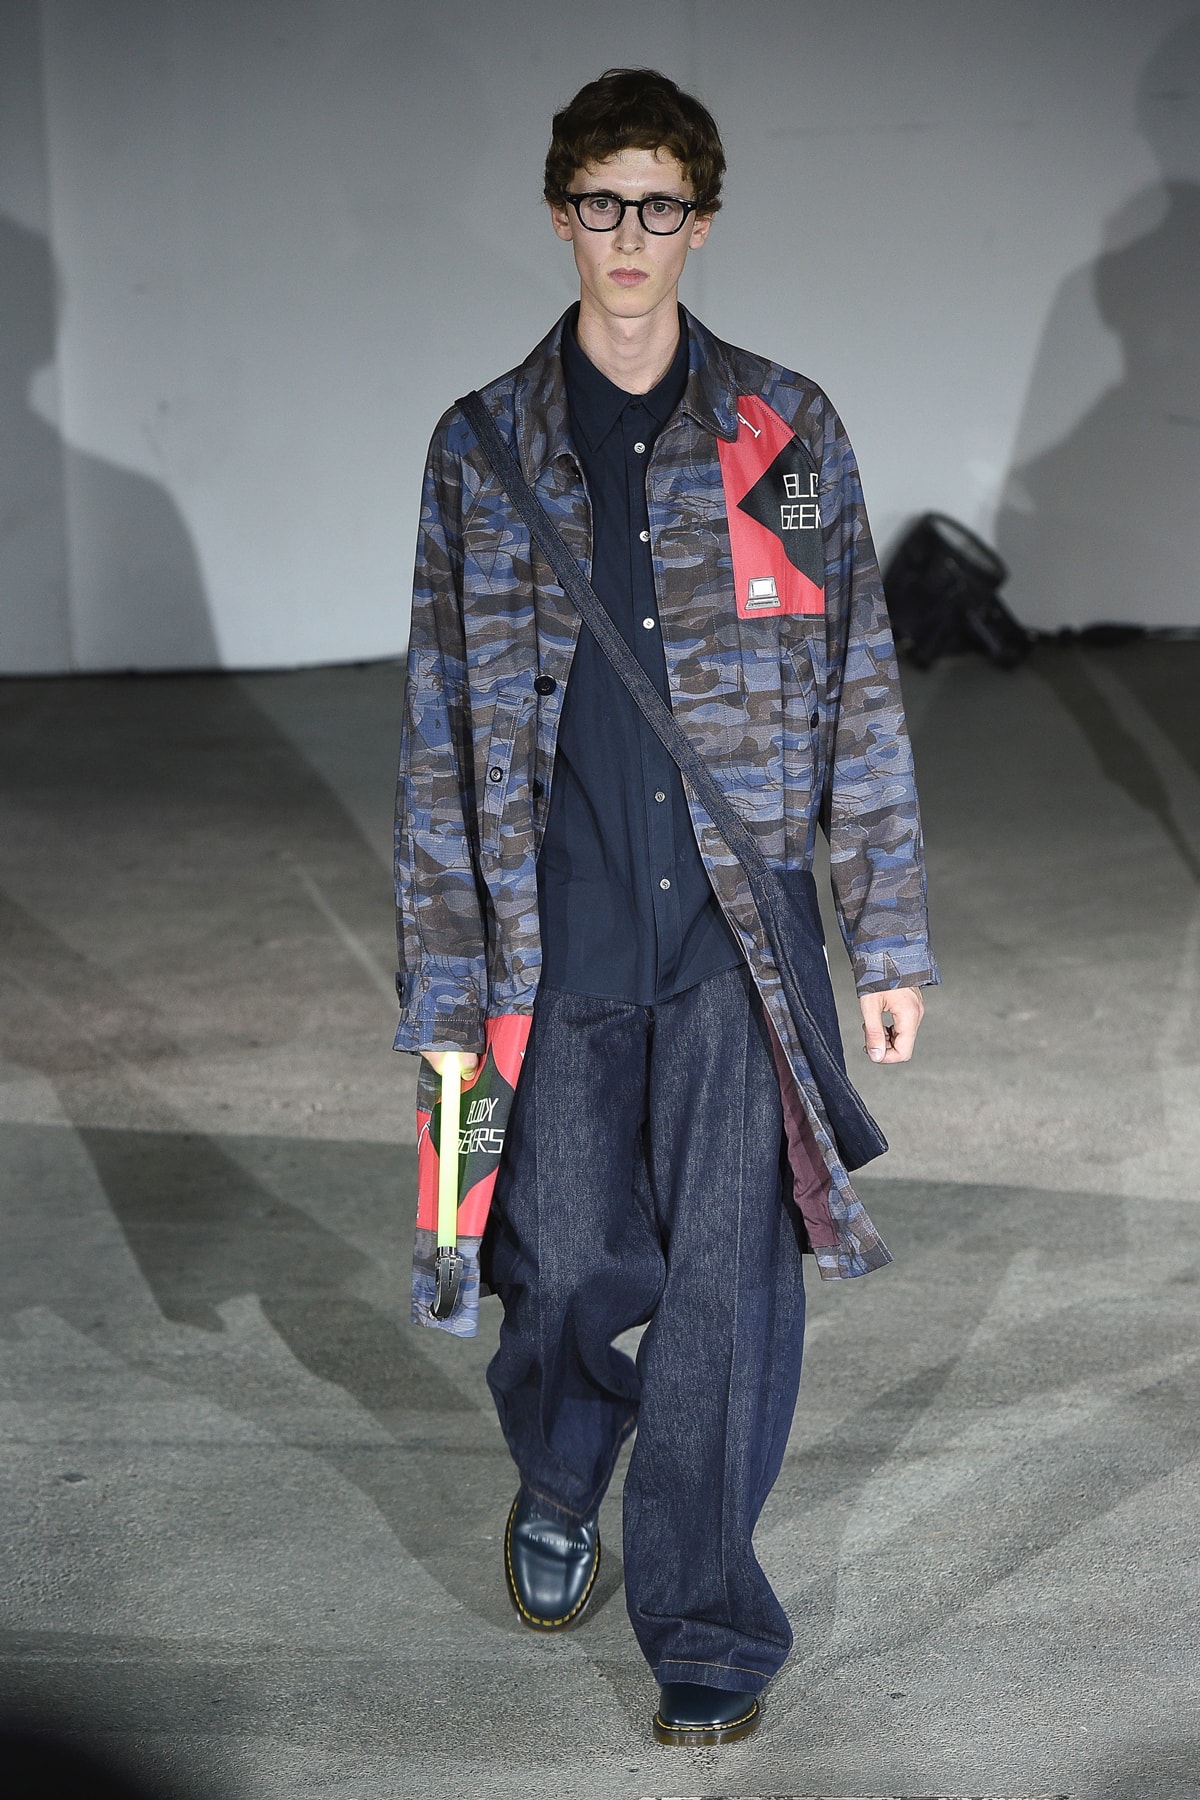 UNDERCOVER Spring Summer 2019 Collection Runway Jun Takahashi Nike Leather Jacket Dr Martens Riot Punk Gangs The New warriors